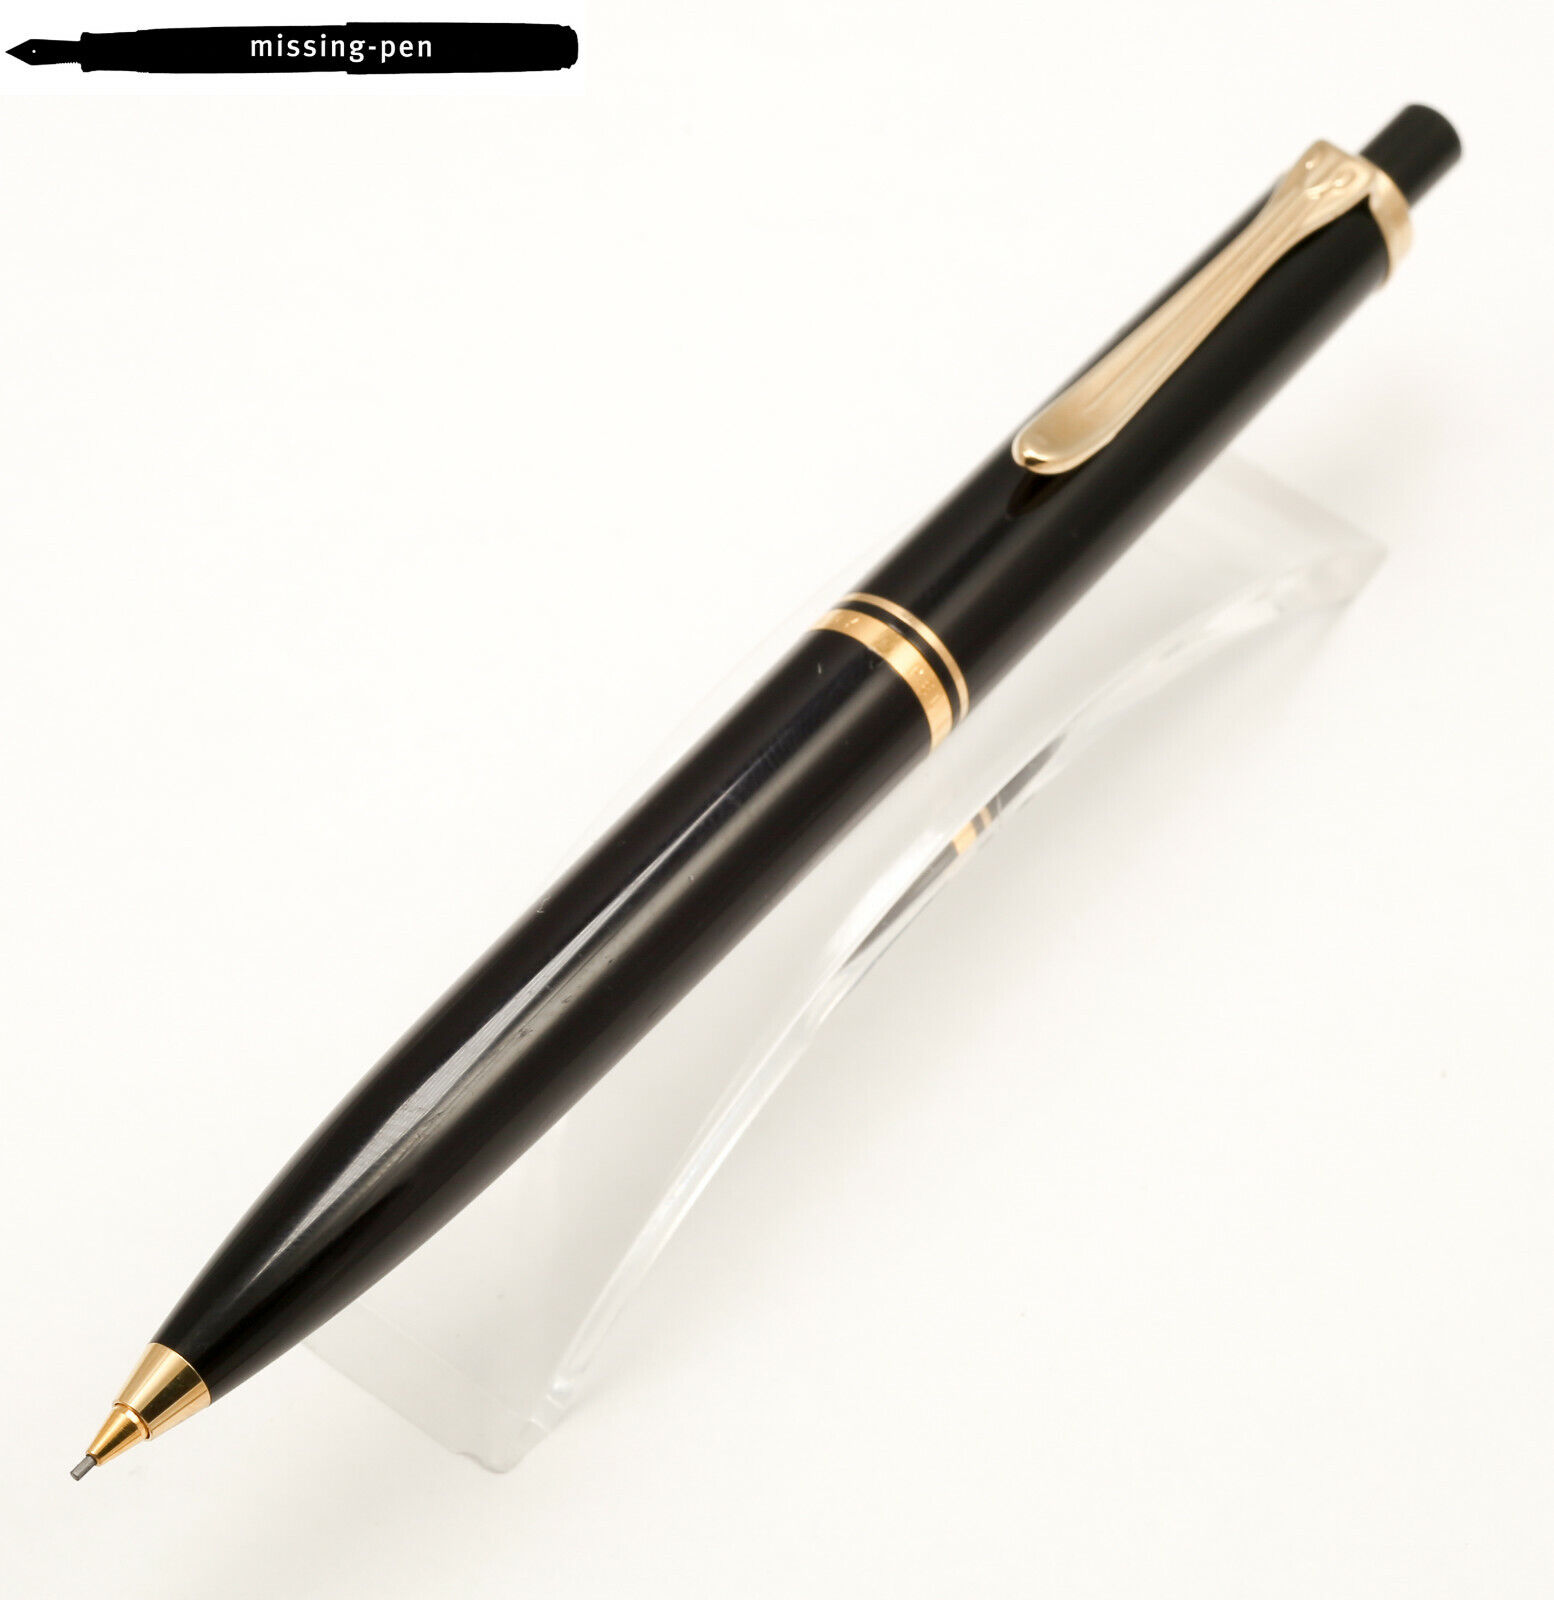 New Style Pelikan D400 Mechanical Pencil (0.7 mm) in Black with new push button